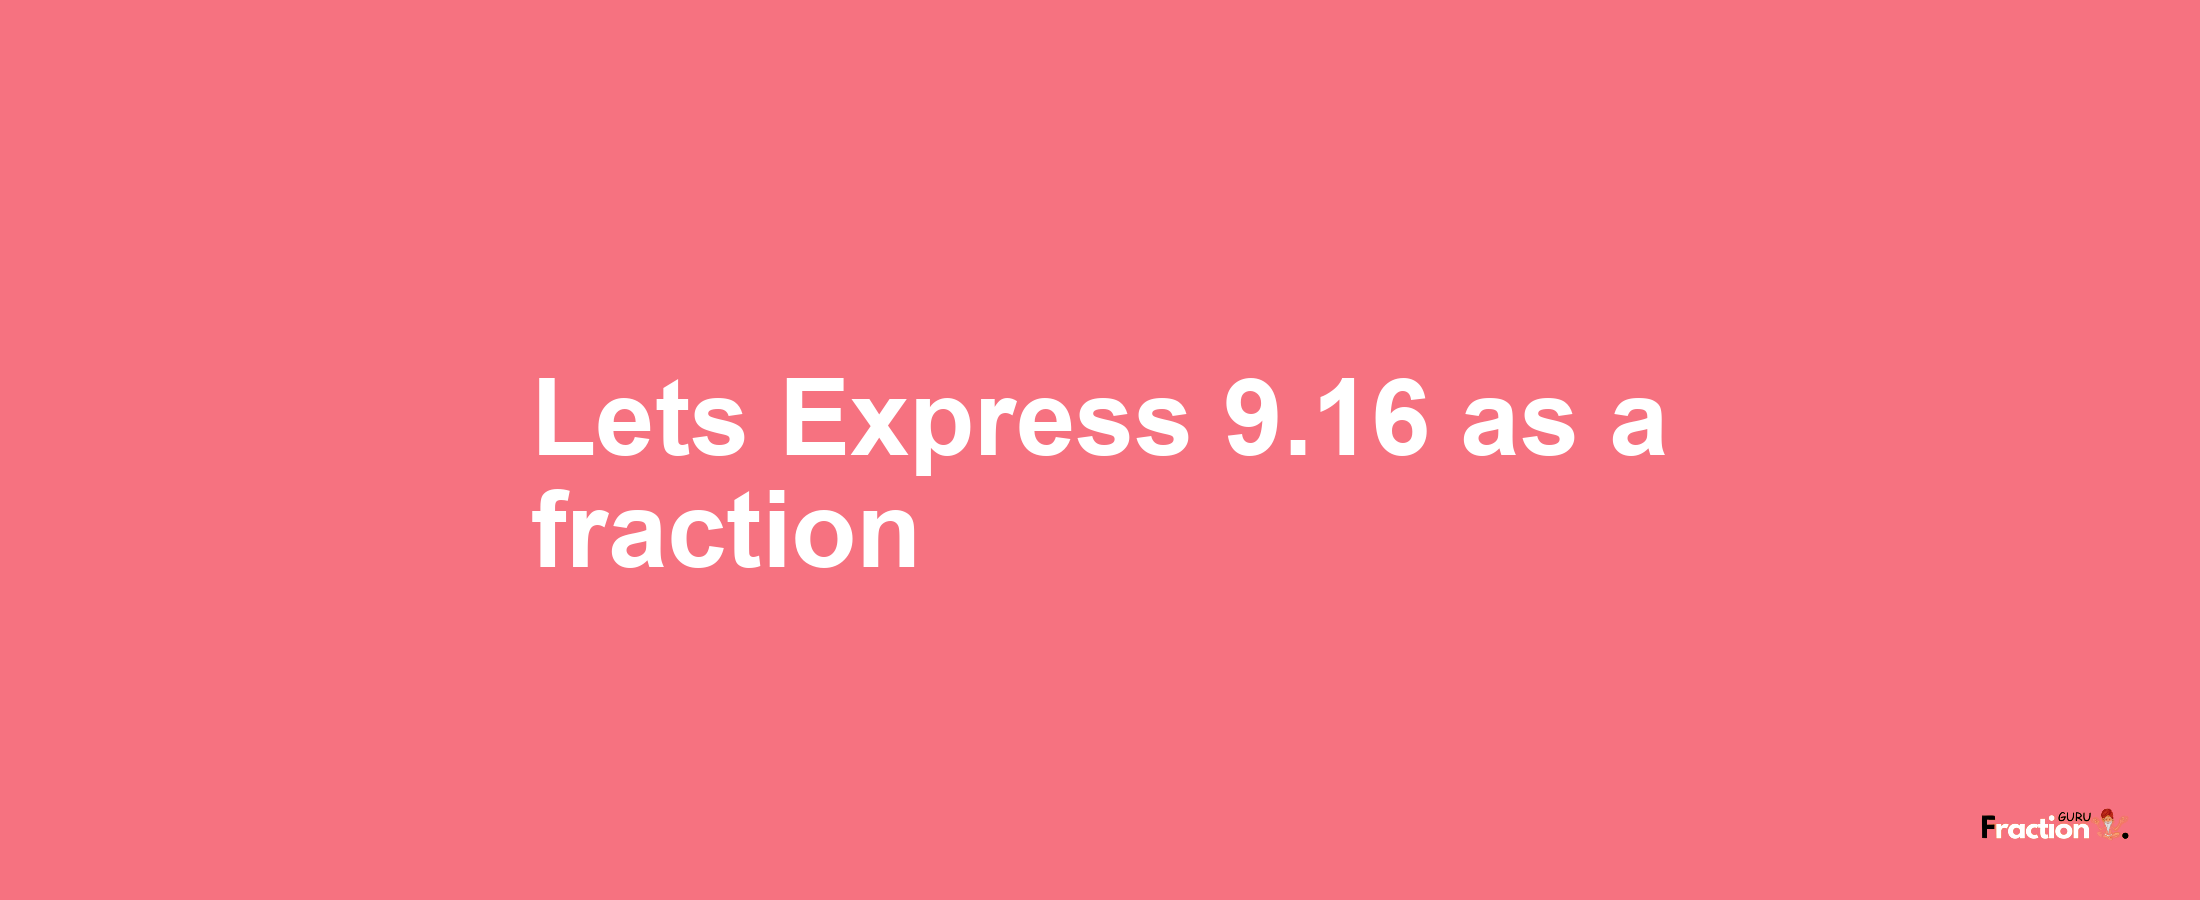 Lets Express 9.16 as afraction